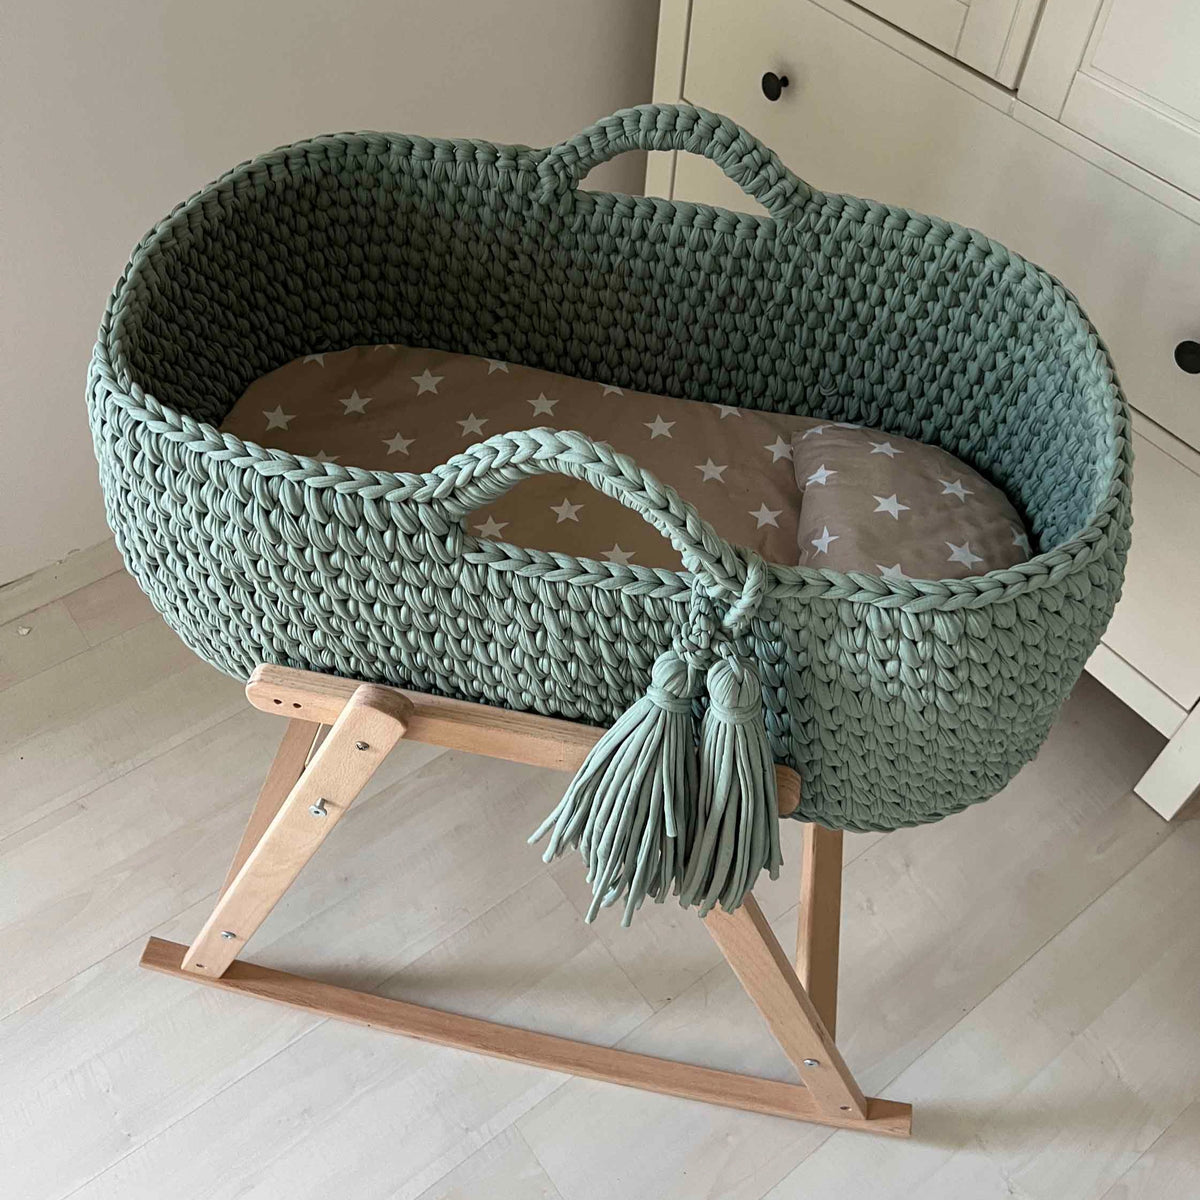 Angel Hand-Knitted Baby Bassinet - Mint Green